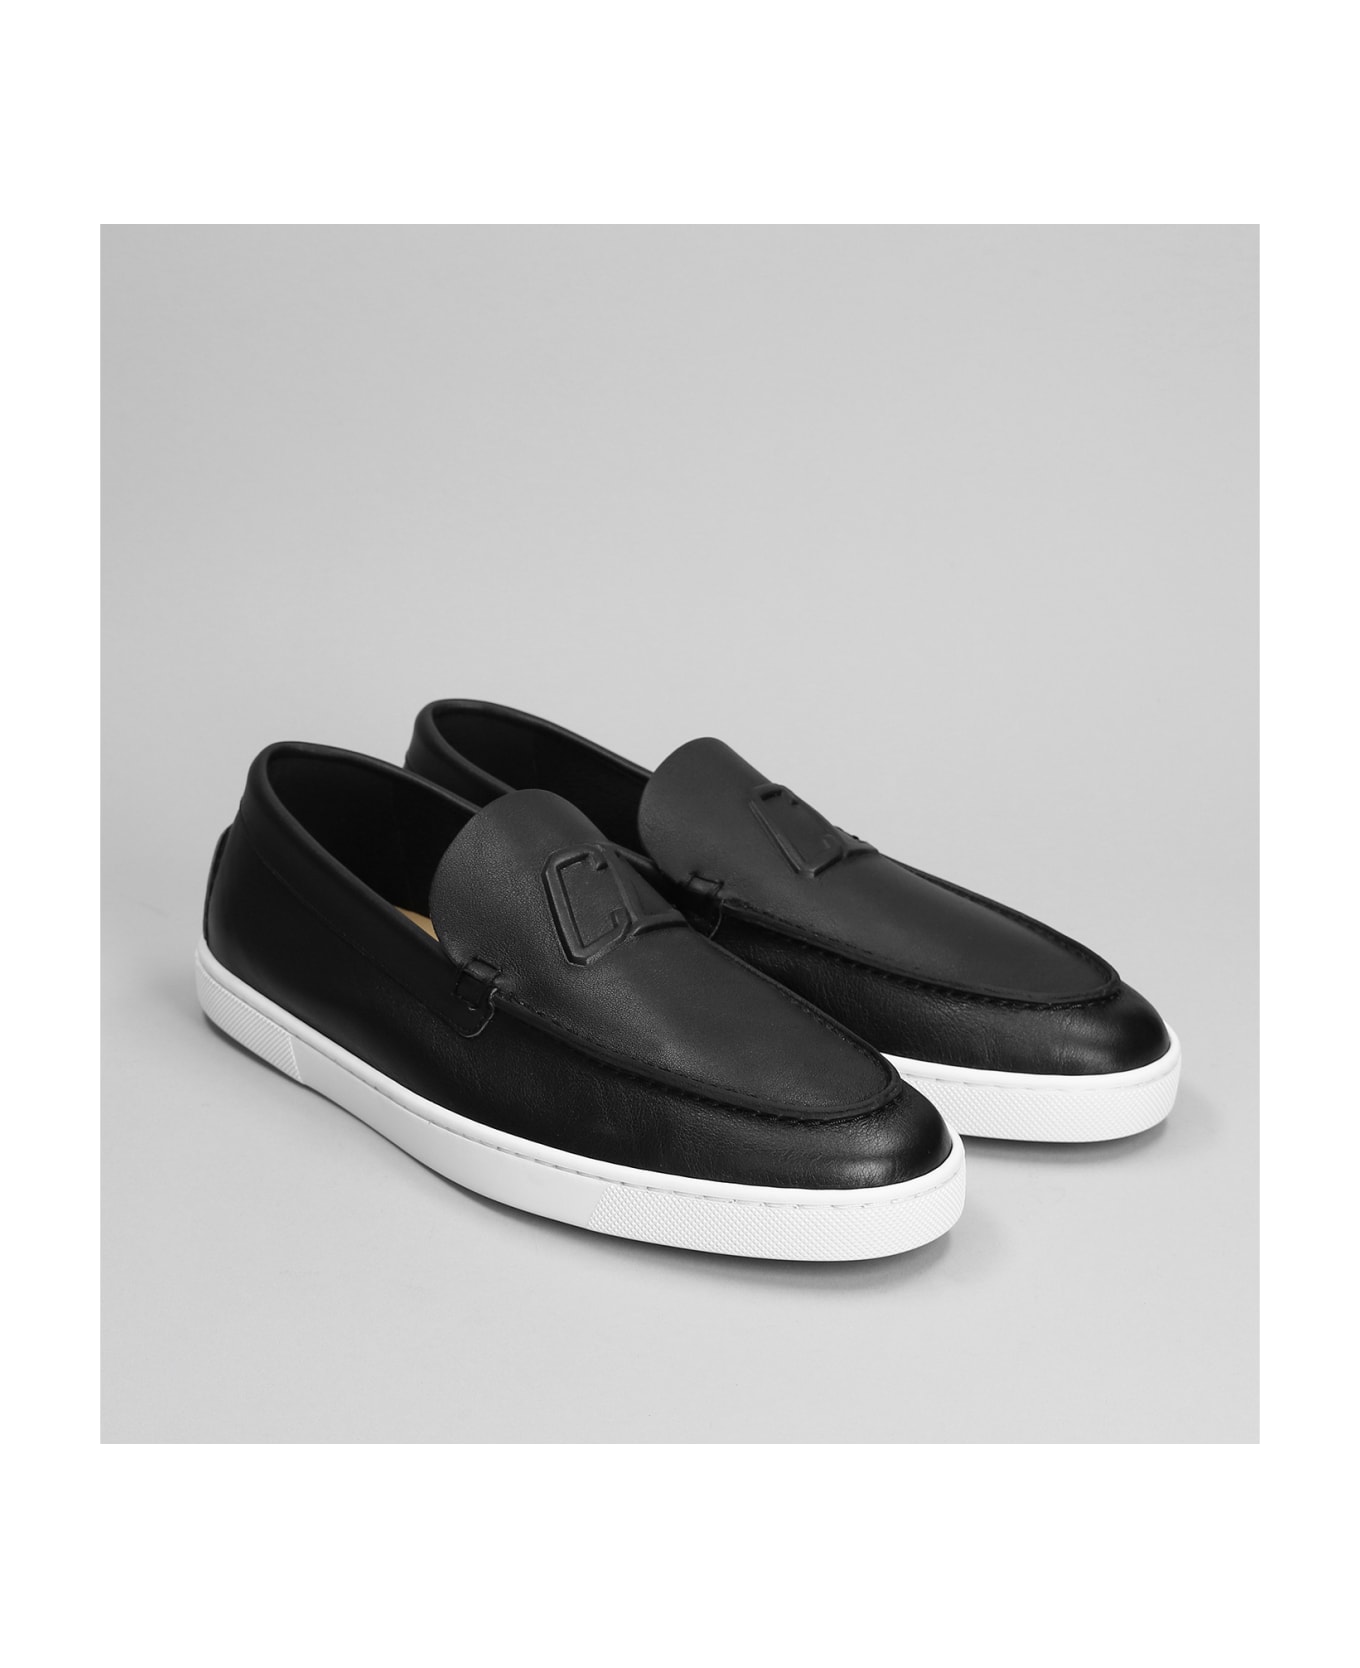 Christian Louboutin Varsiboat Loafers In Black Leather - black ローファー＆デッキシューズ